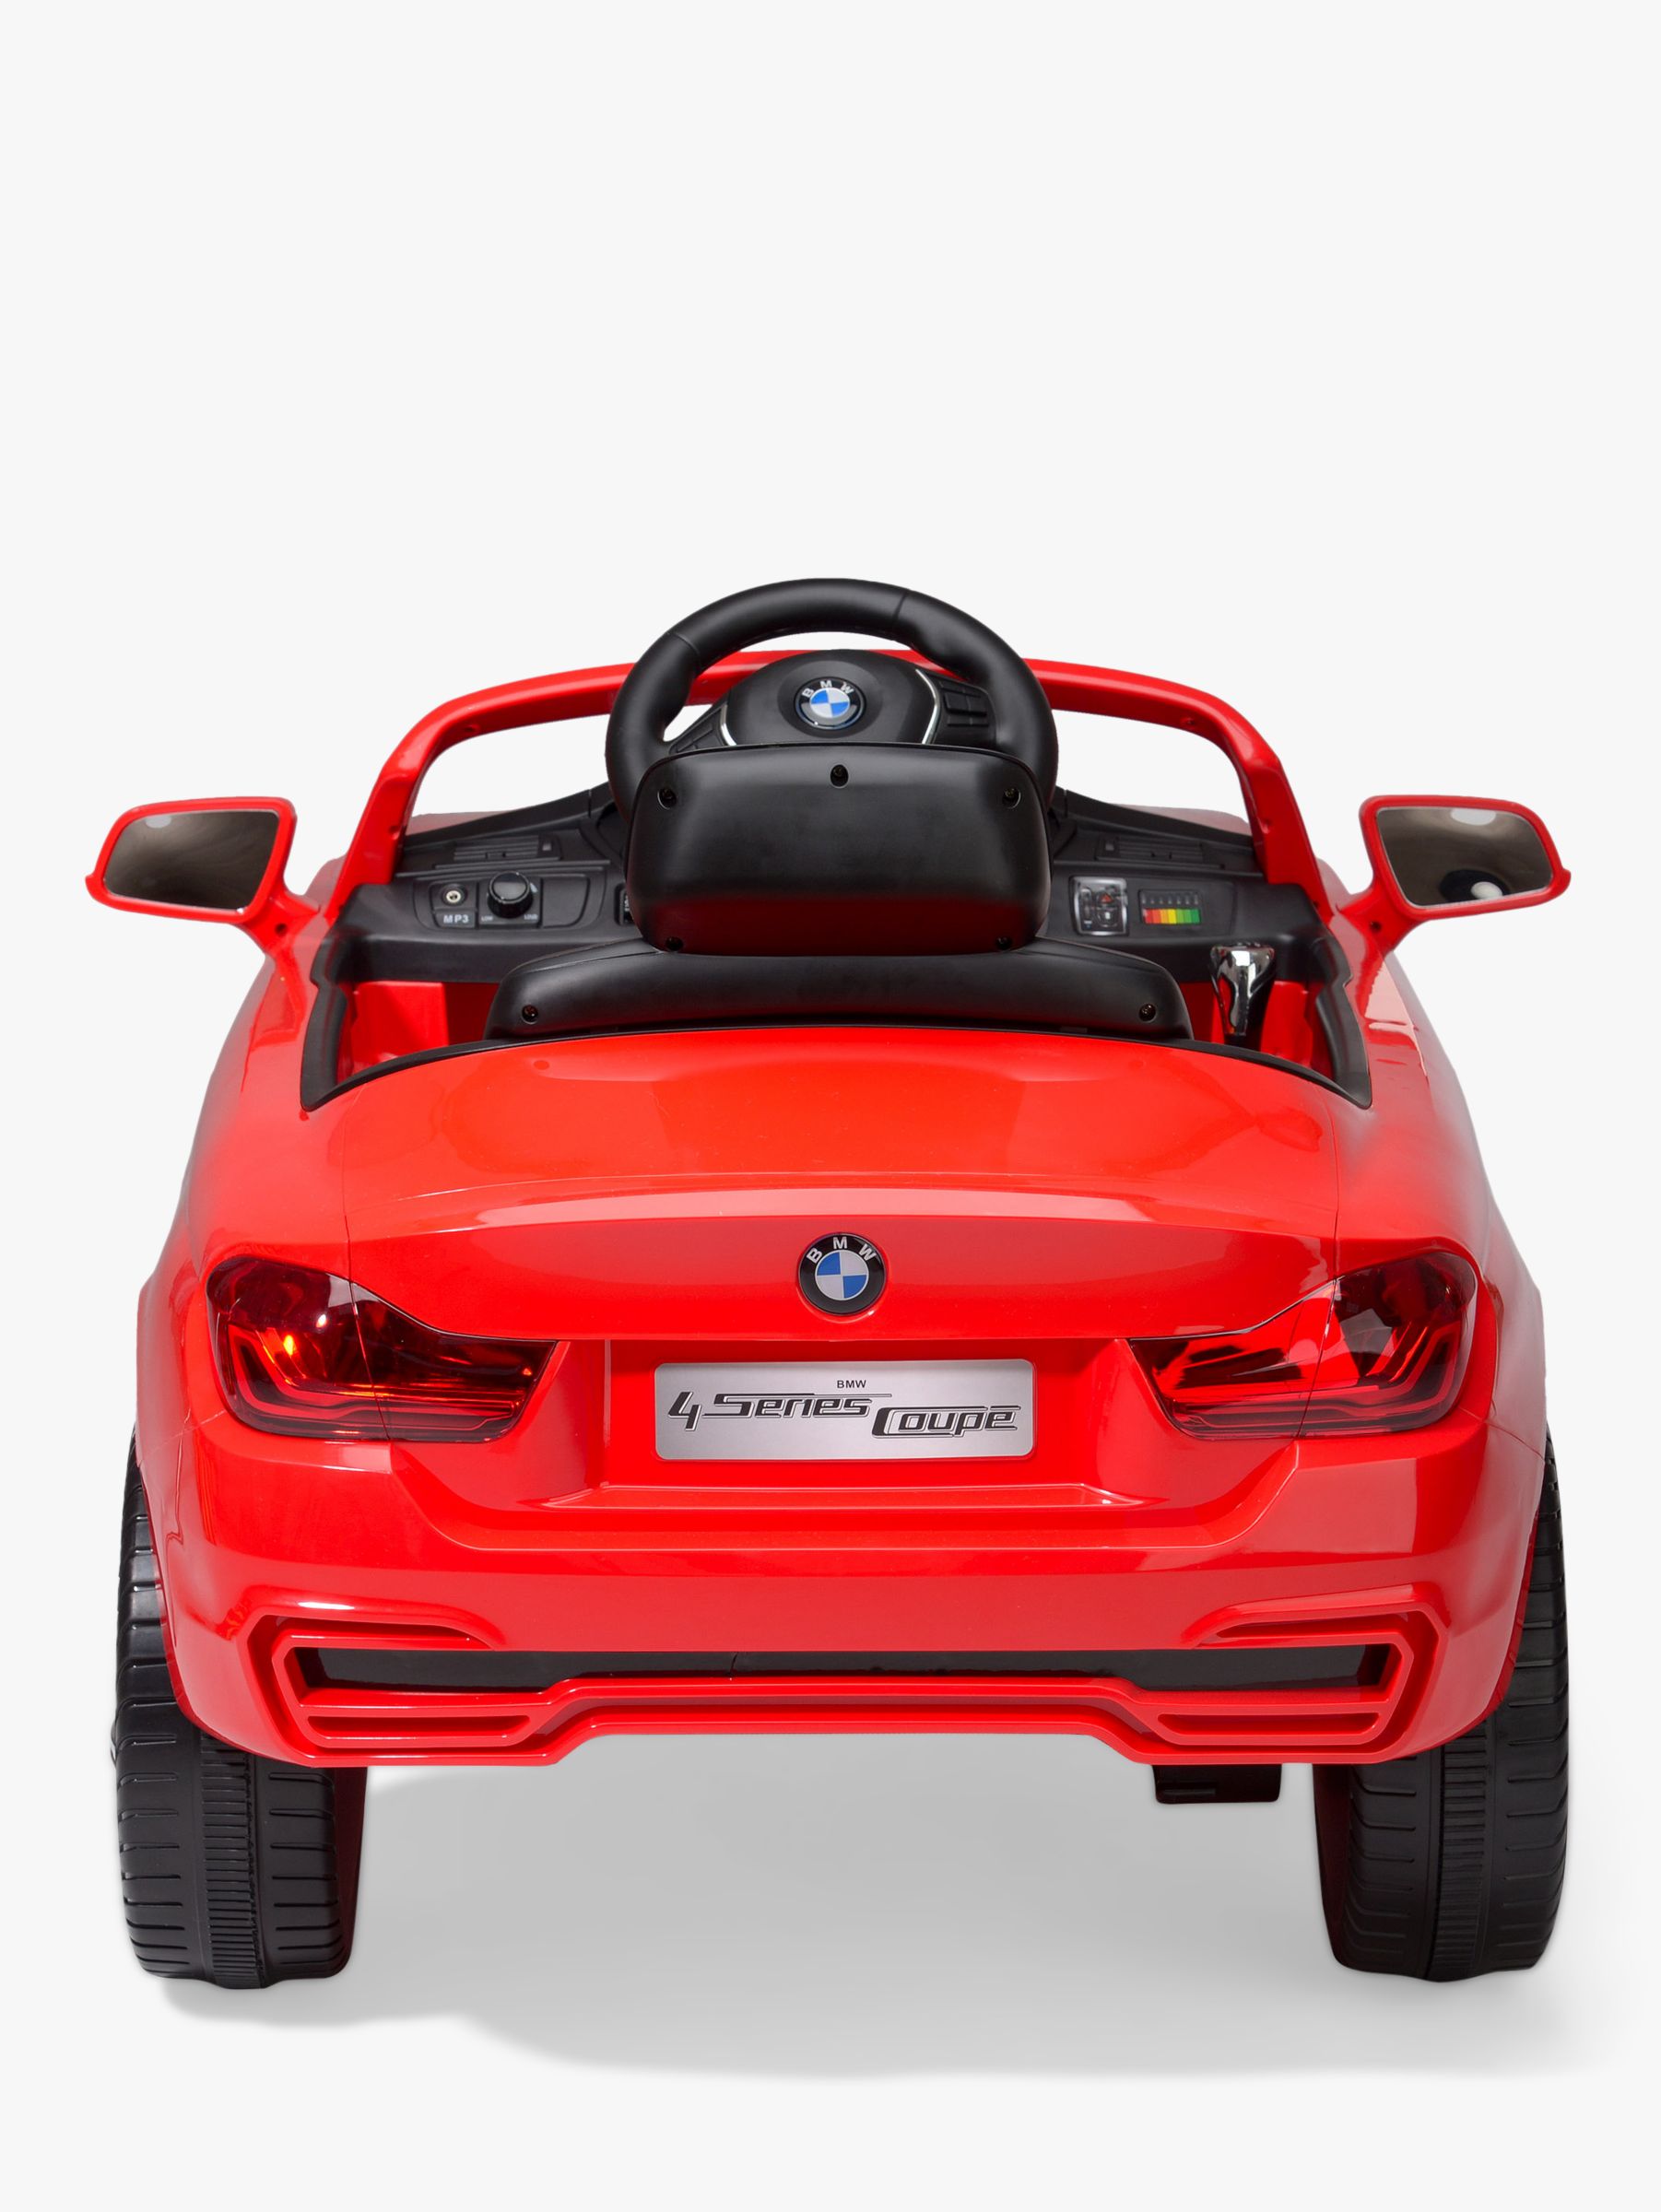 Bmw 4 Series Electric Ride On Toy Car At John Lewis Partners